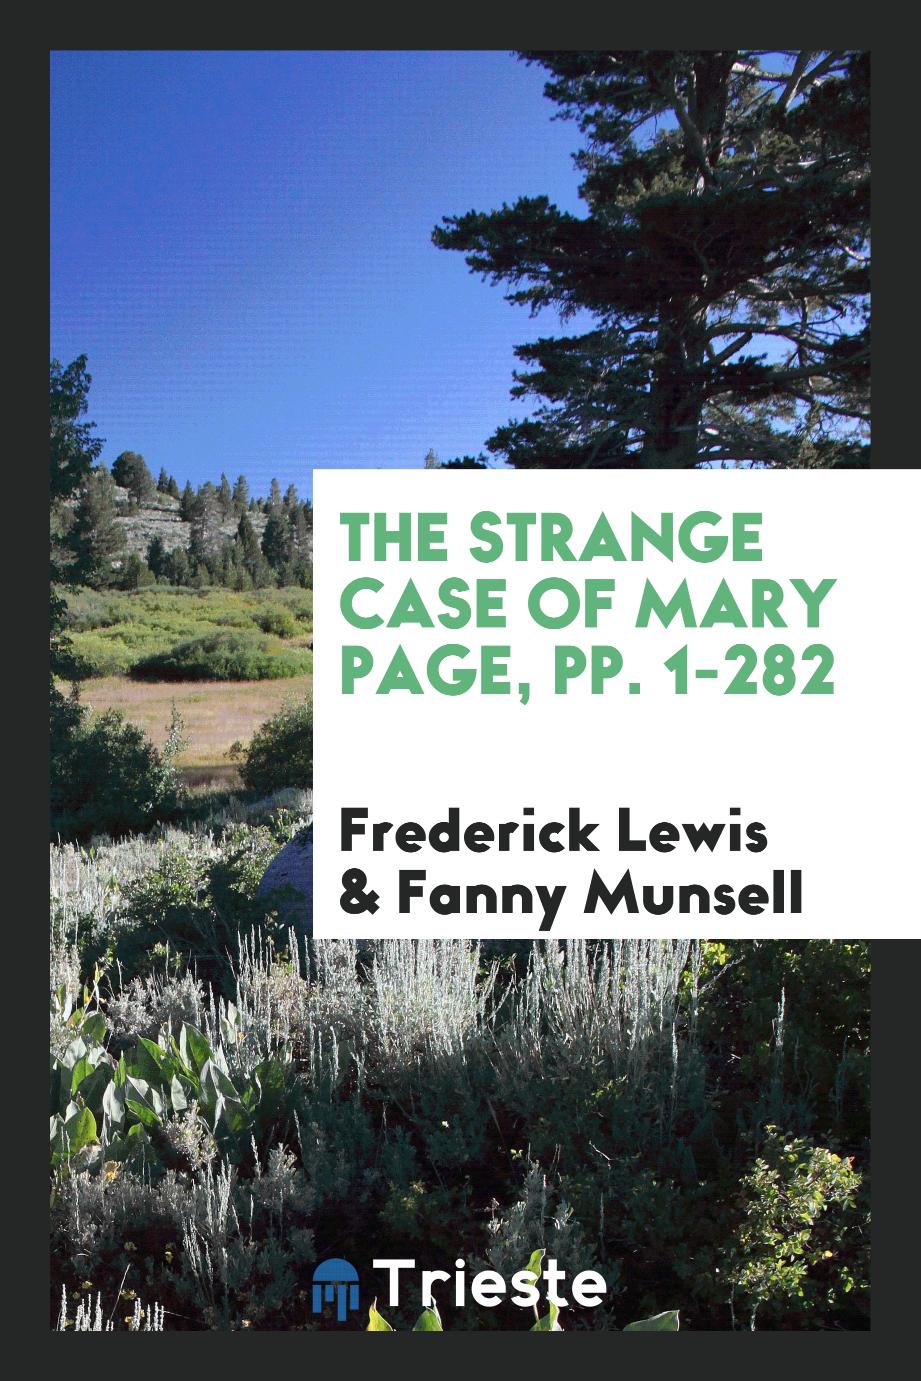 The Strange Case of Mary Page, pp. 1-282